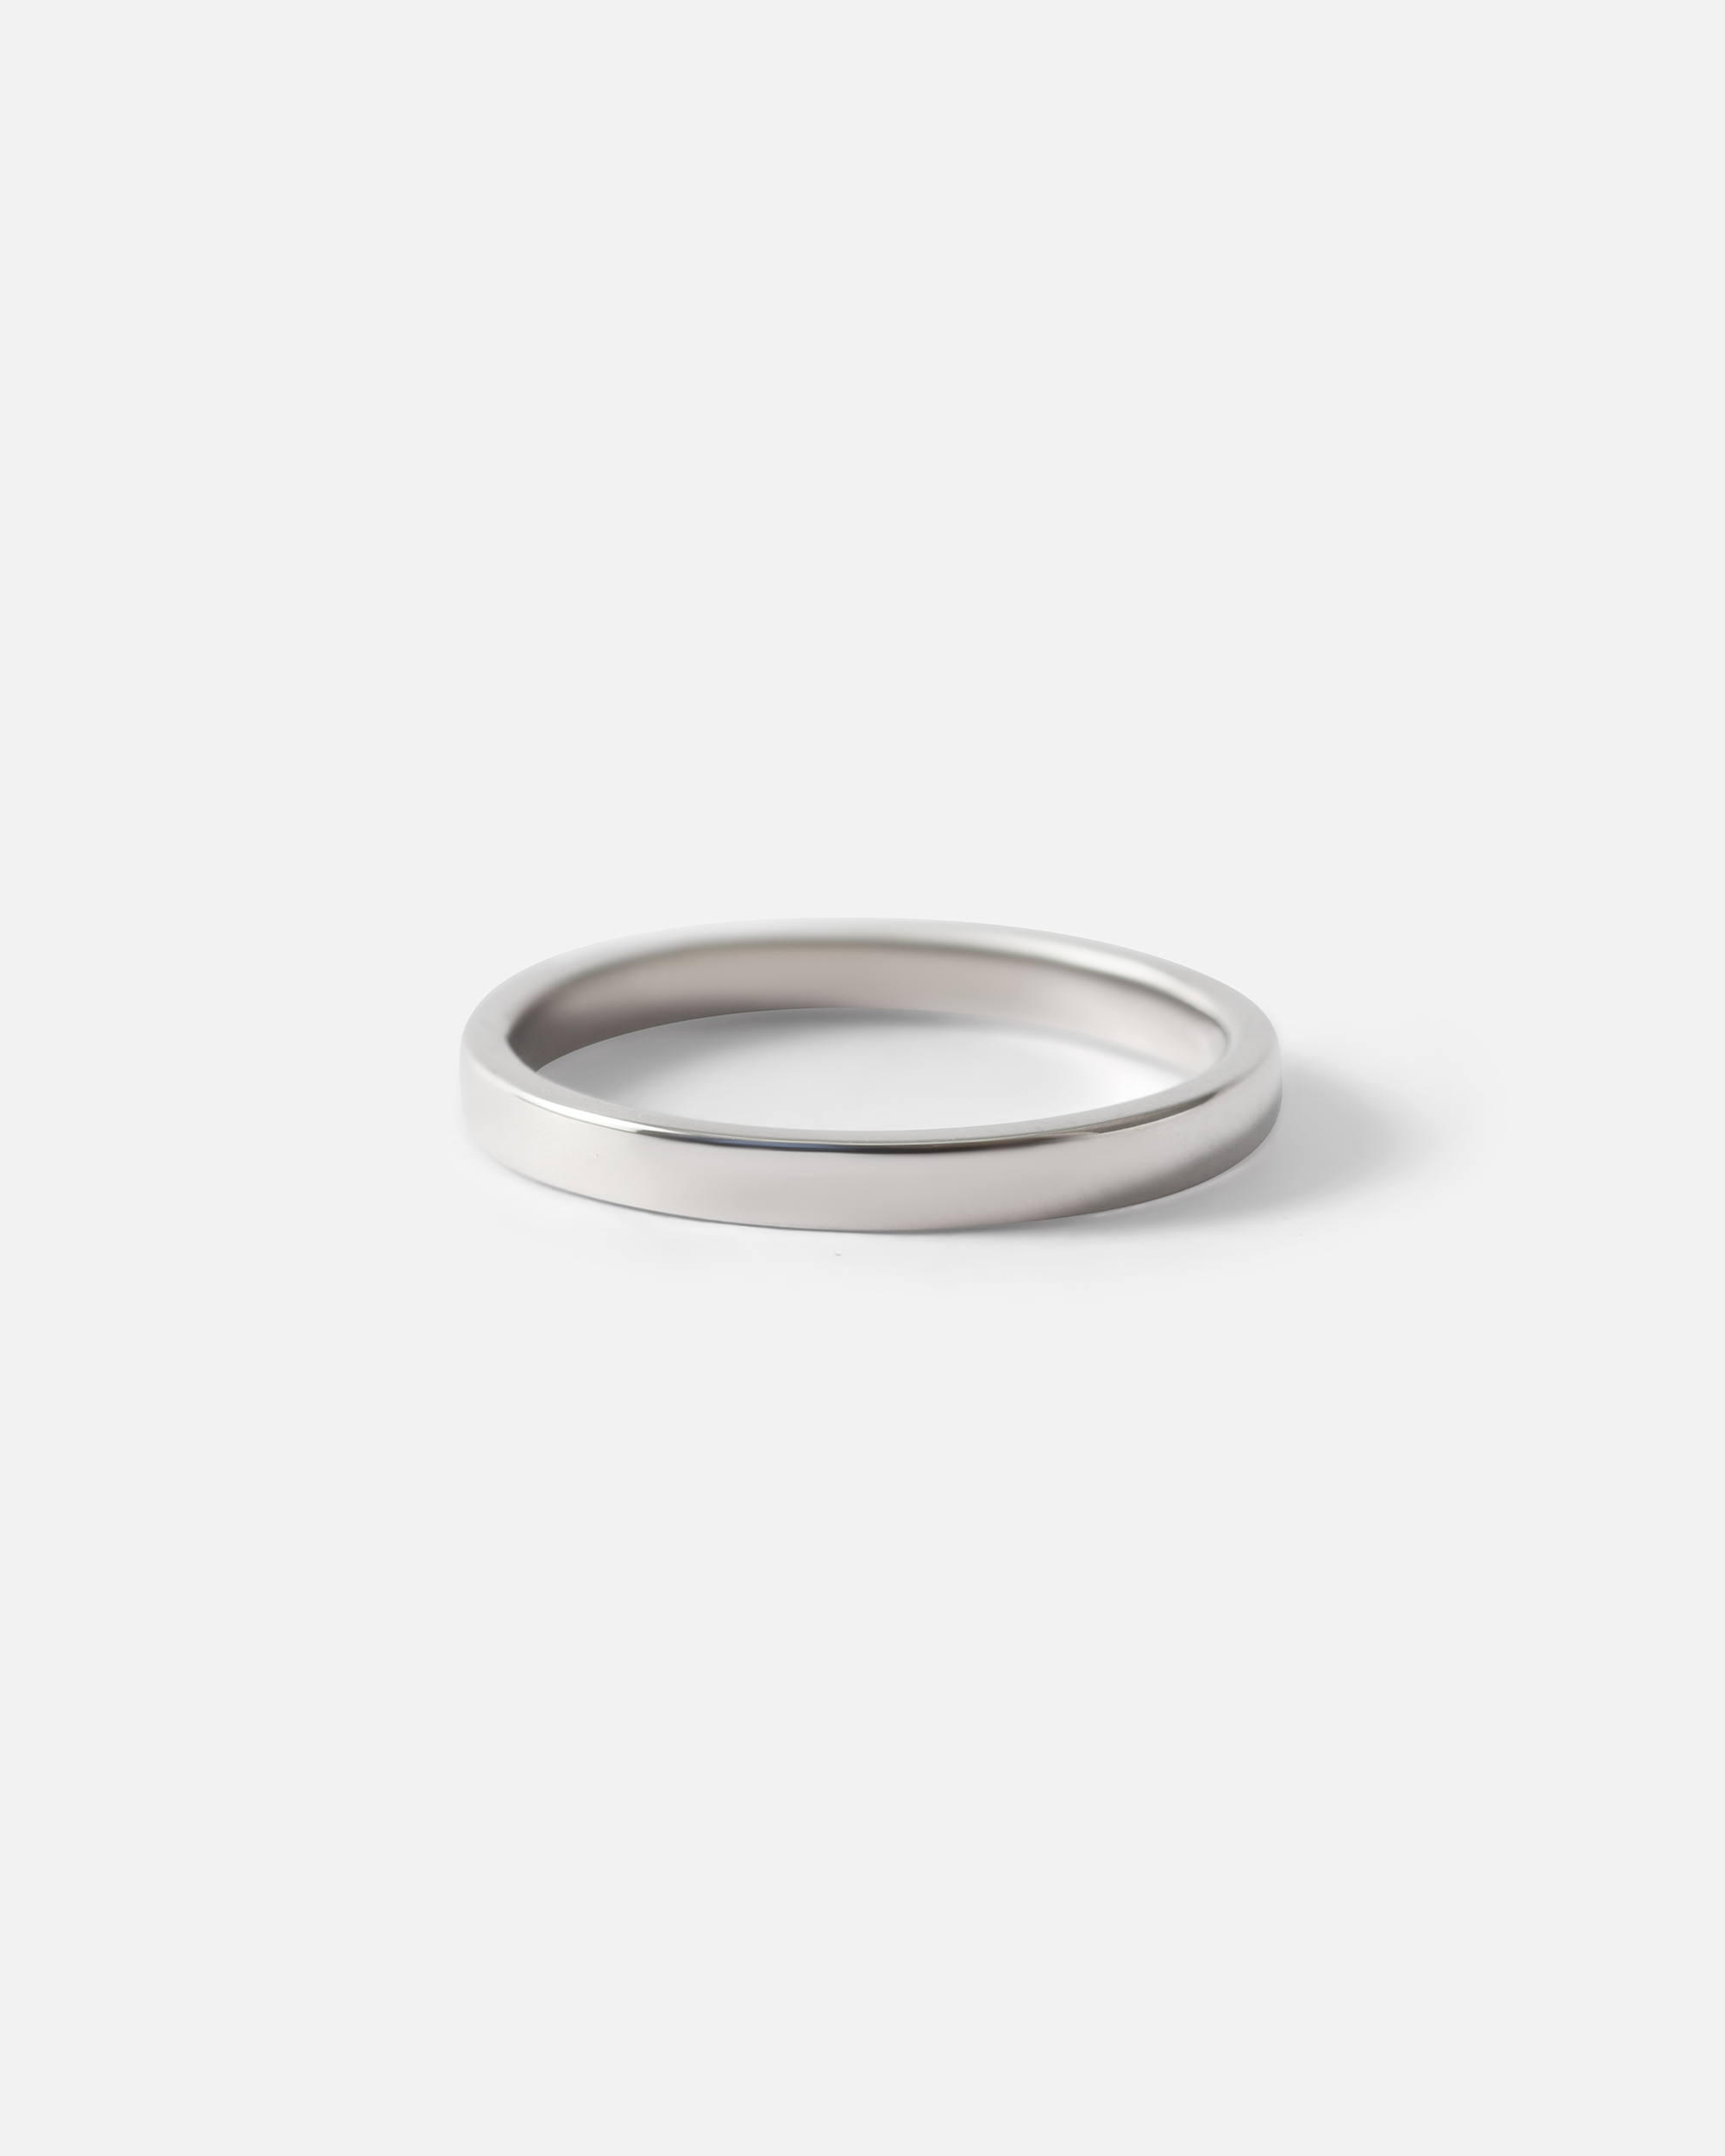 Angled view of Flat Band / 2mm Customizable By Hiroyo in Platinum